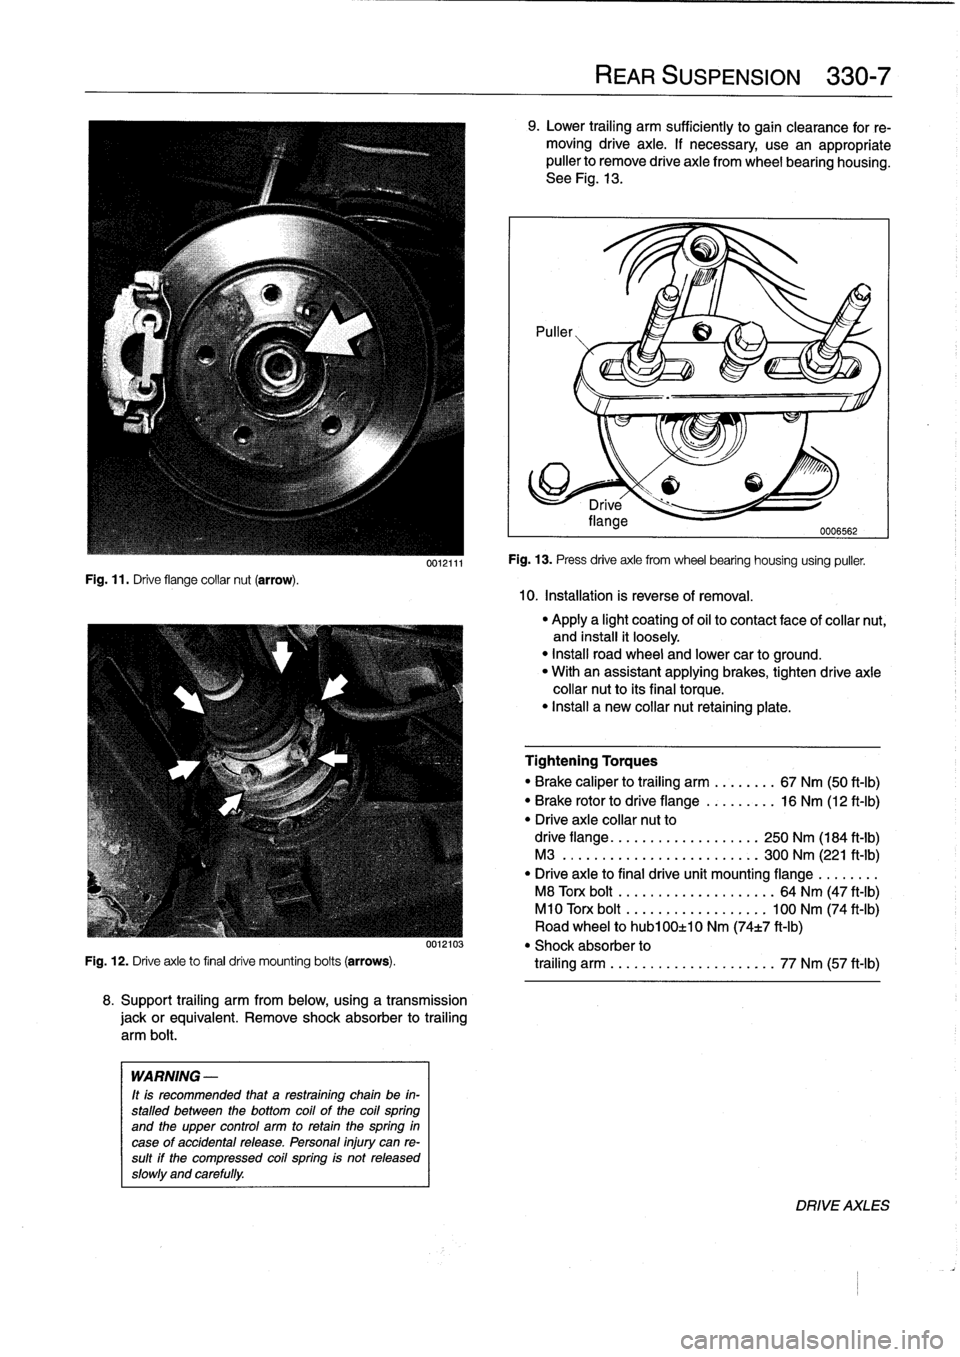 BMW 318i 1994 E36 User Guide 
Fig
.
11
.
Drive
flange
collar
nut
(arrow)
.

0012111

8
.
Support
trailing
arm
from
below,
using
a
transmission

jackorequivalent
.
Remove
shock
absorber
to
trailing

arm
bolt
.

WARNING
-

It
is
re